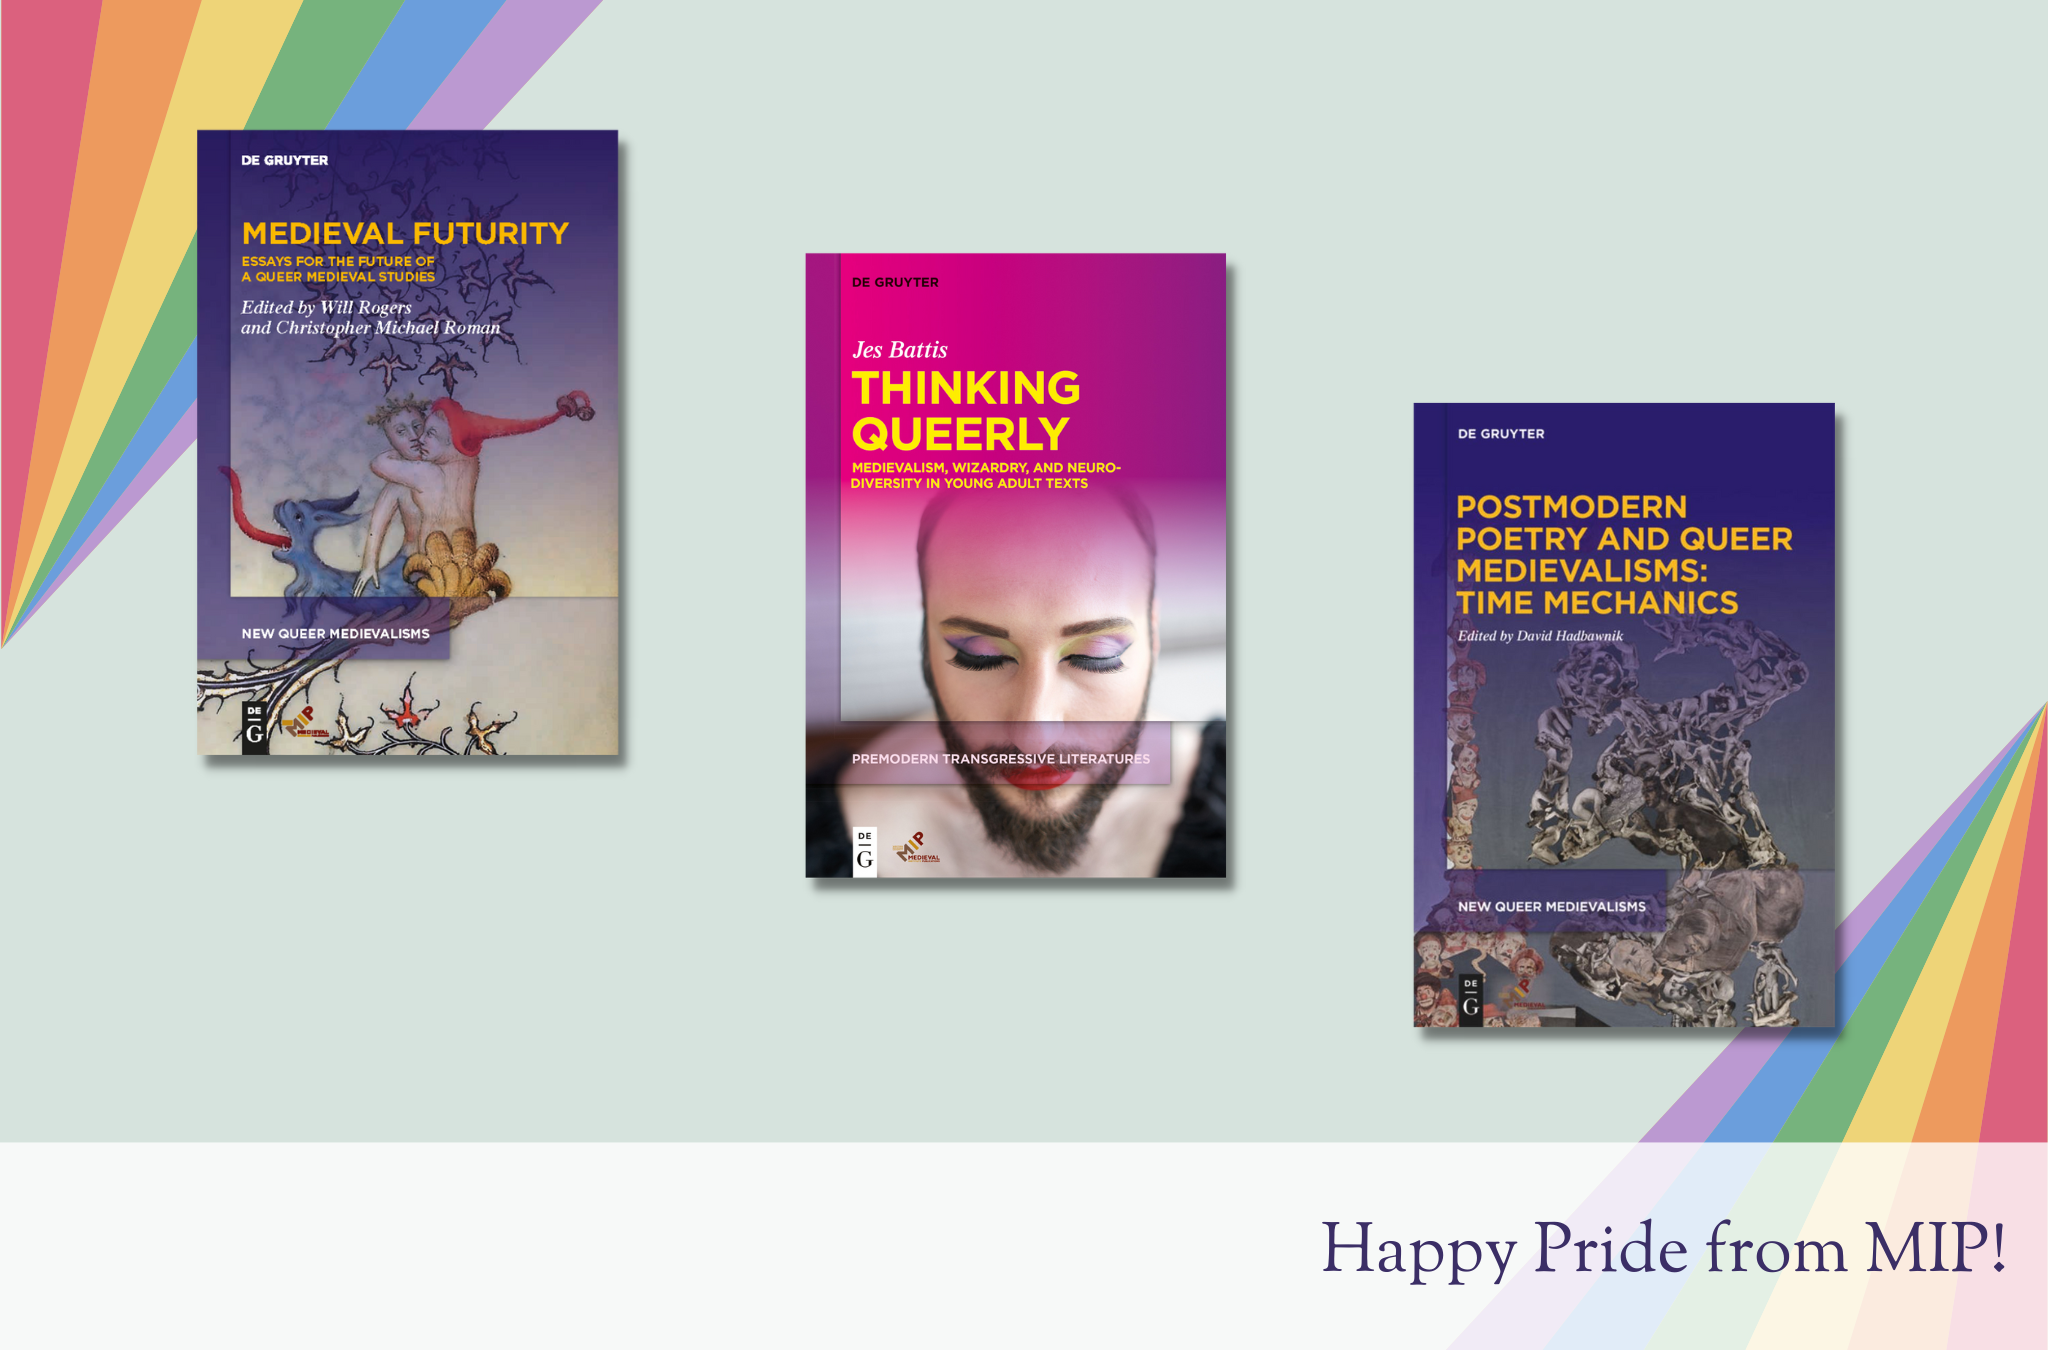 A pale green background with rainbow fans in the lower right and upper left corners. Book covers for Medieval Futurity, Thinking Queerly, and Postmodern Poetry and Queer Medievalisms are diagonally stacked in the center. Purple text at the bottom reads Happy Pride from MIP